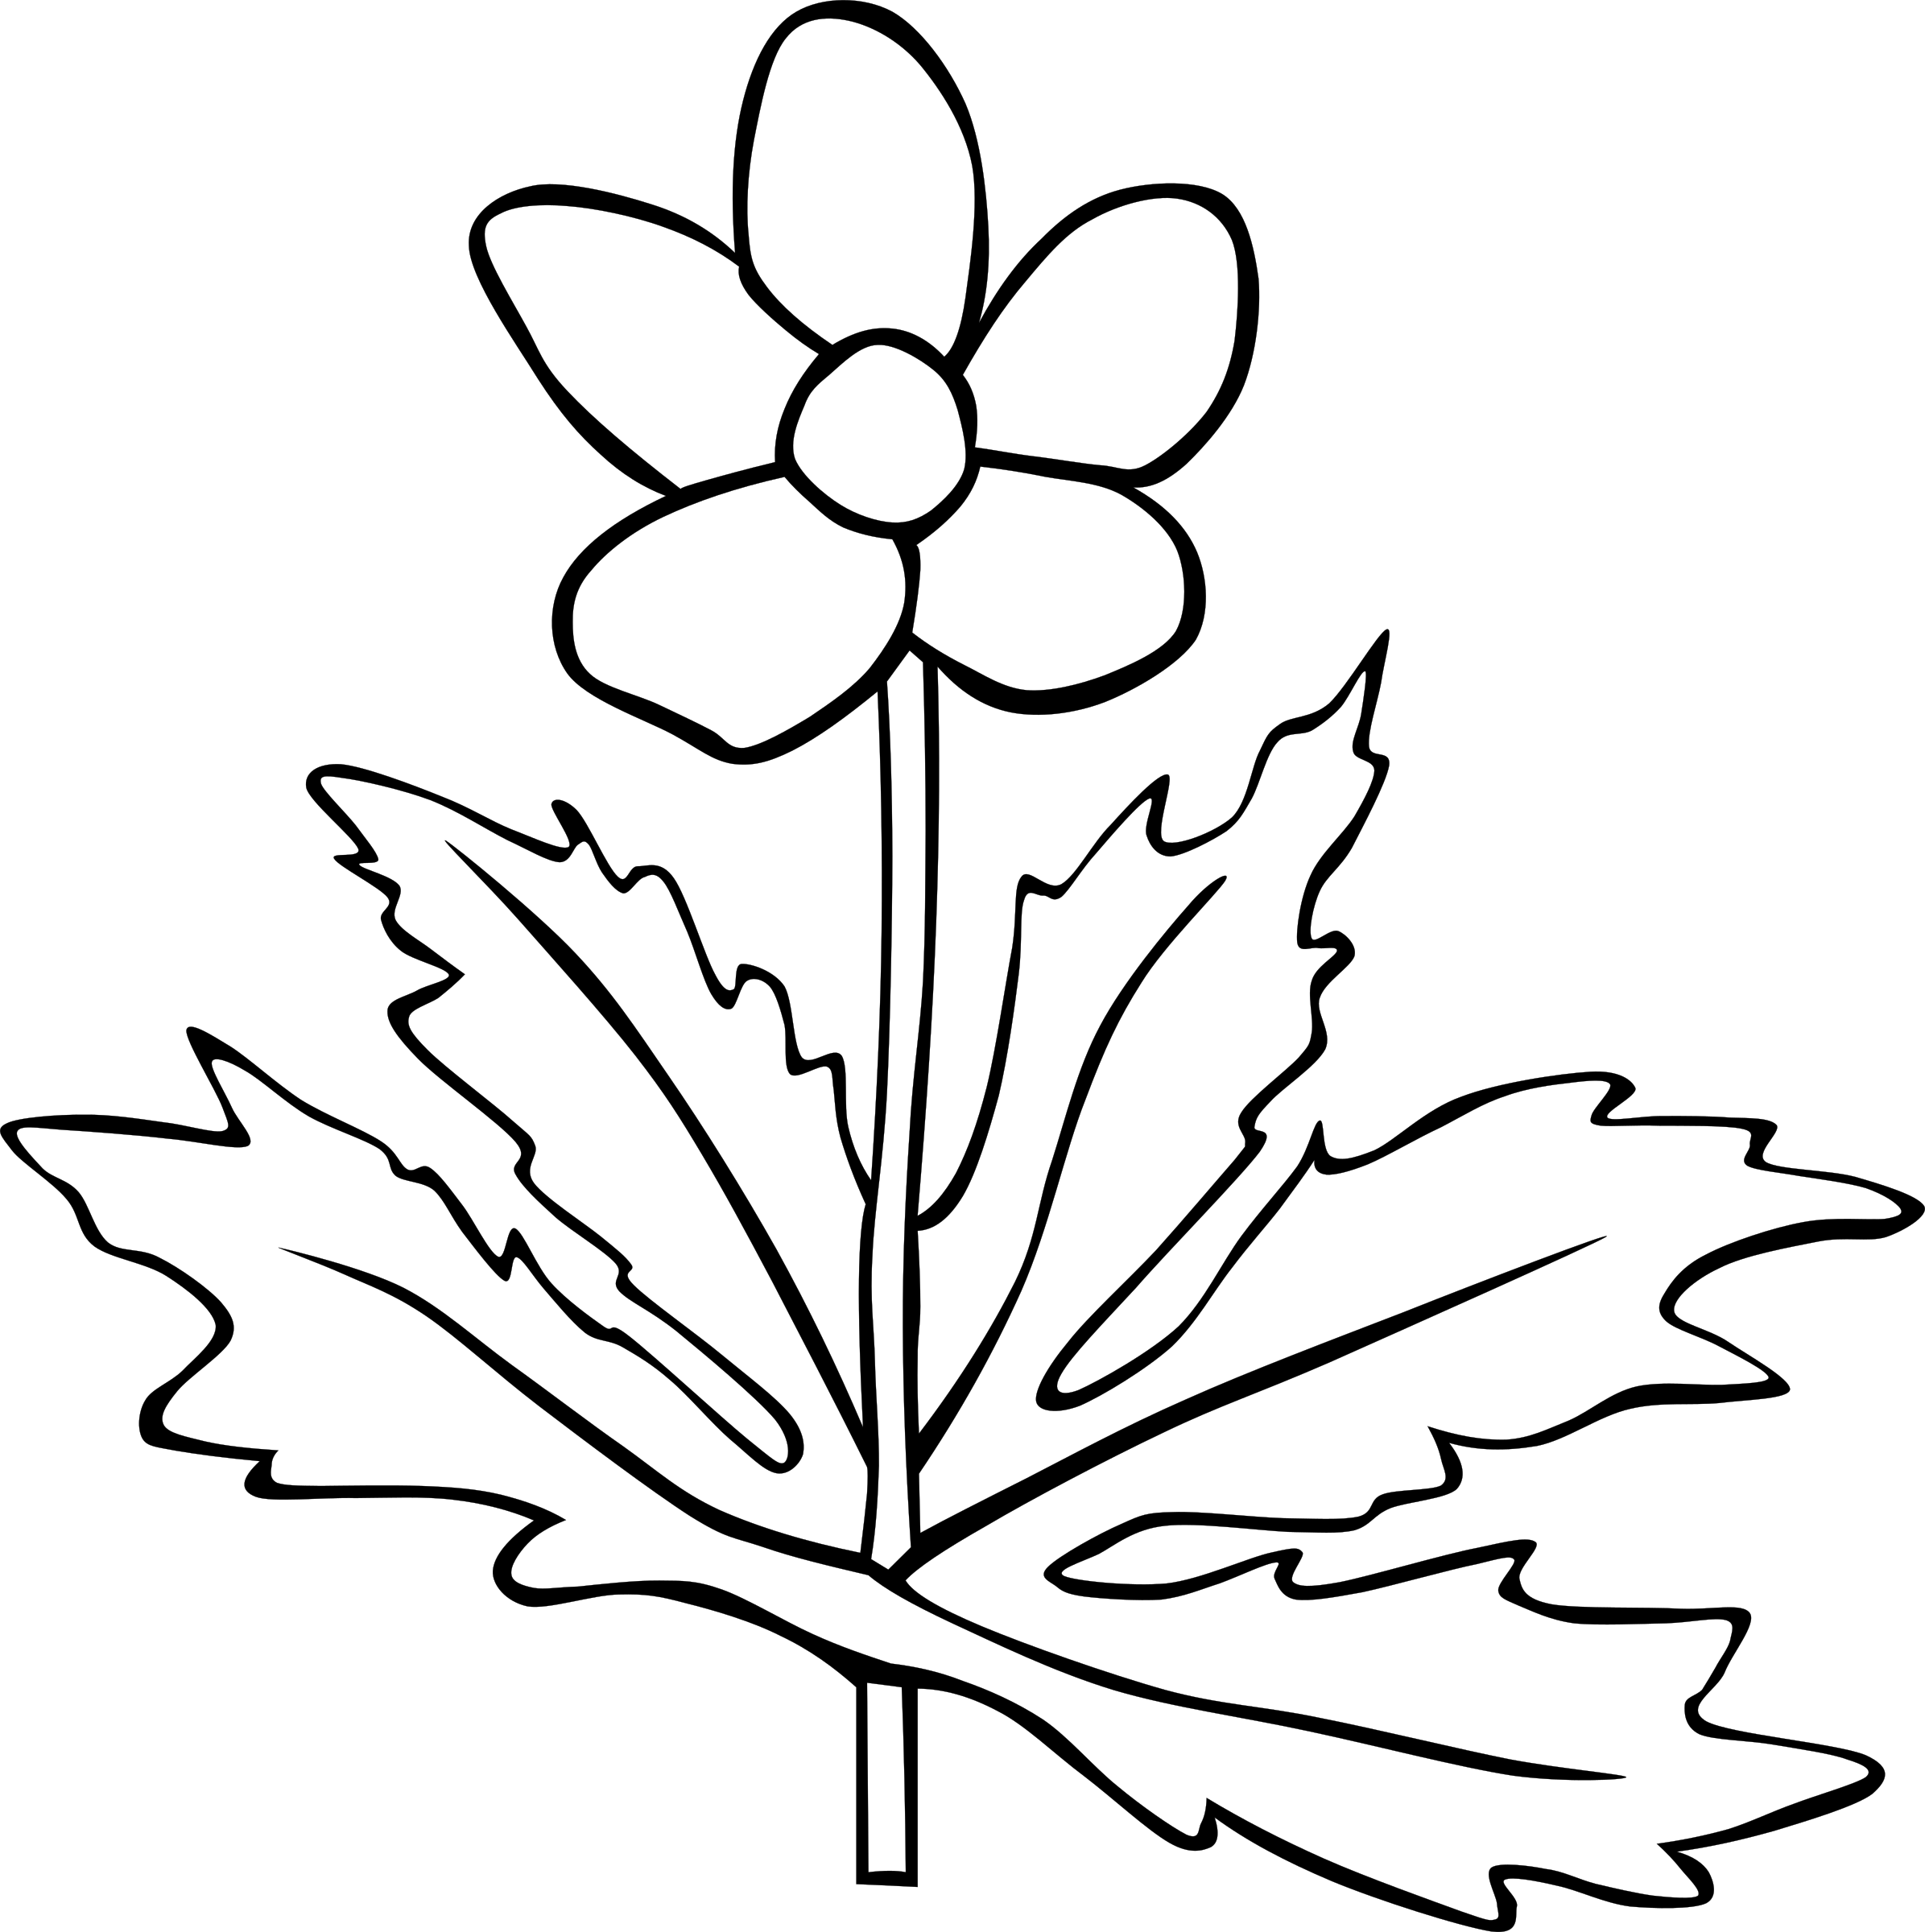 Anemone Canadensis Flower Outline PNG icon